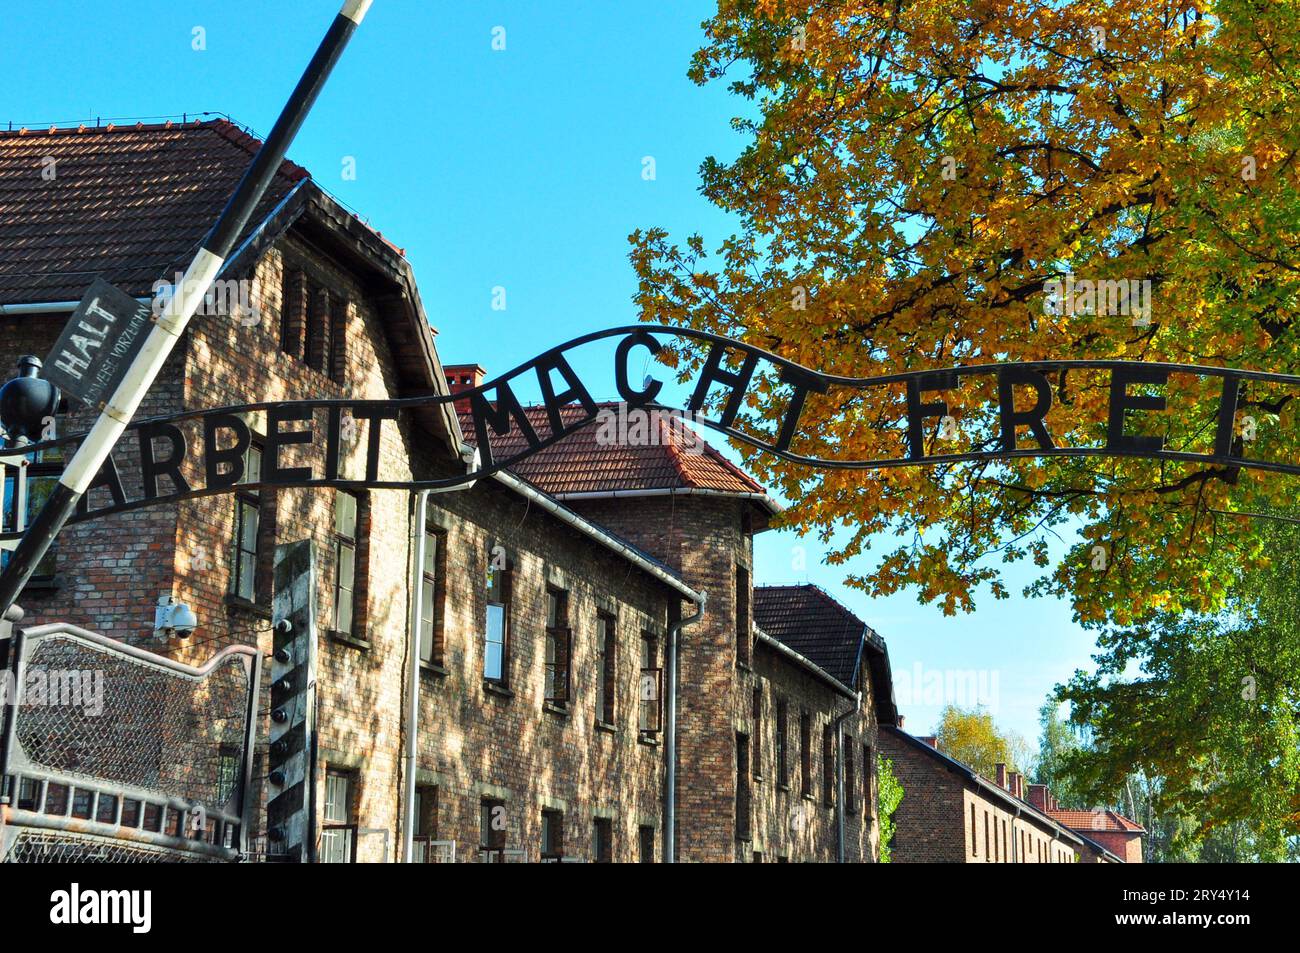 The infamous Arbeit Macht Frei ('Work sets you free') sign Auschwitz concentration camp, where an estimated 1.1million Jews were killed. RIP Stock Photo